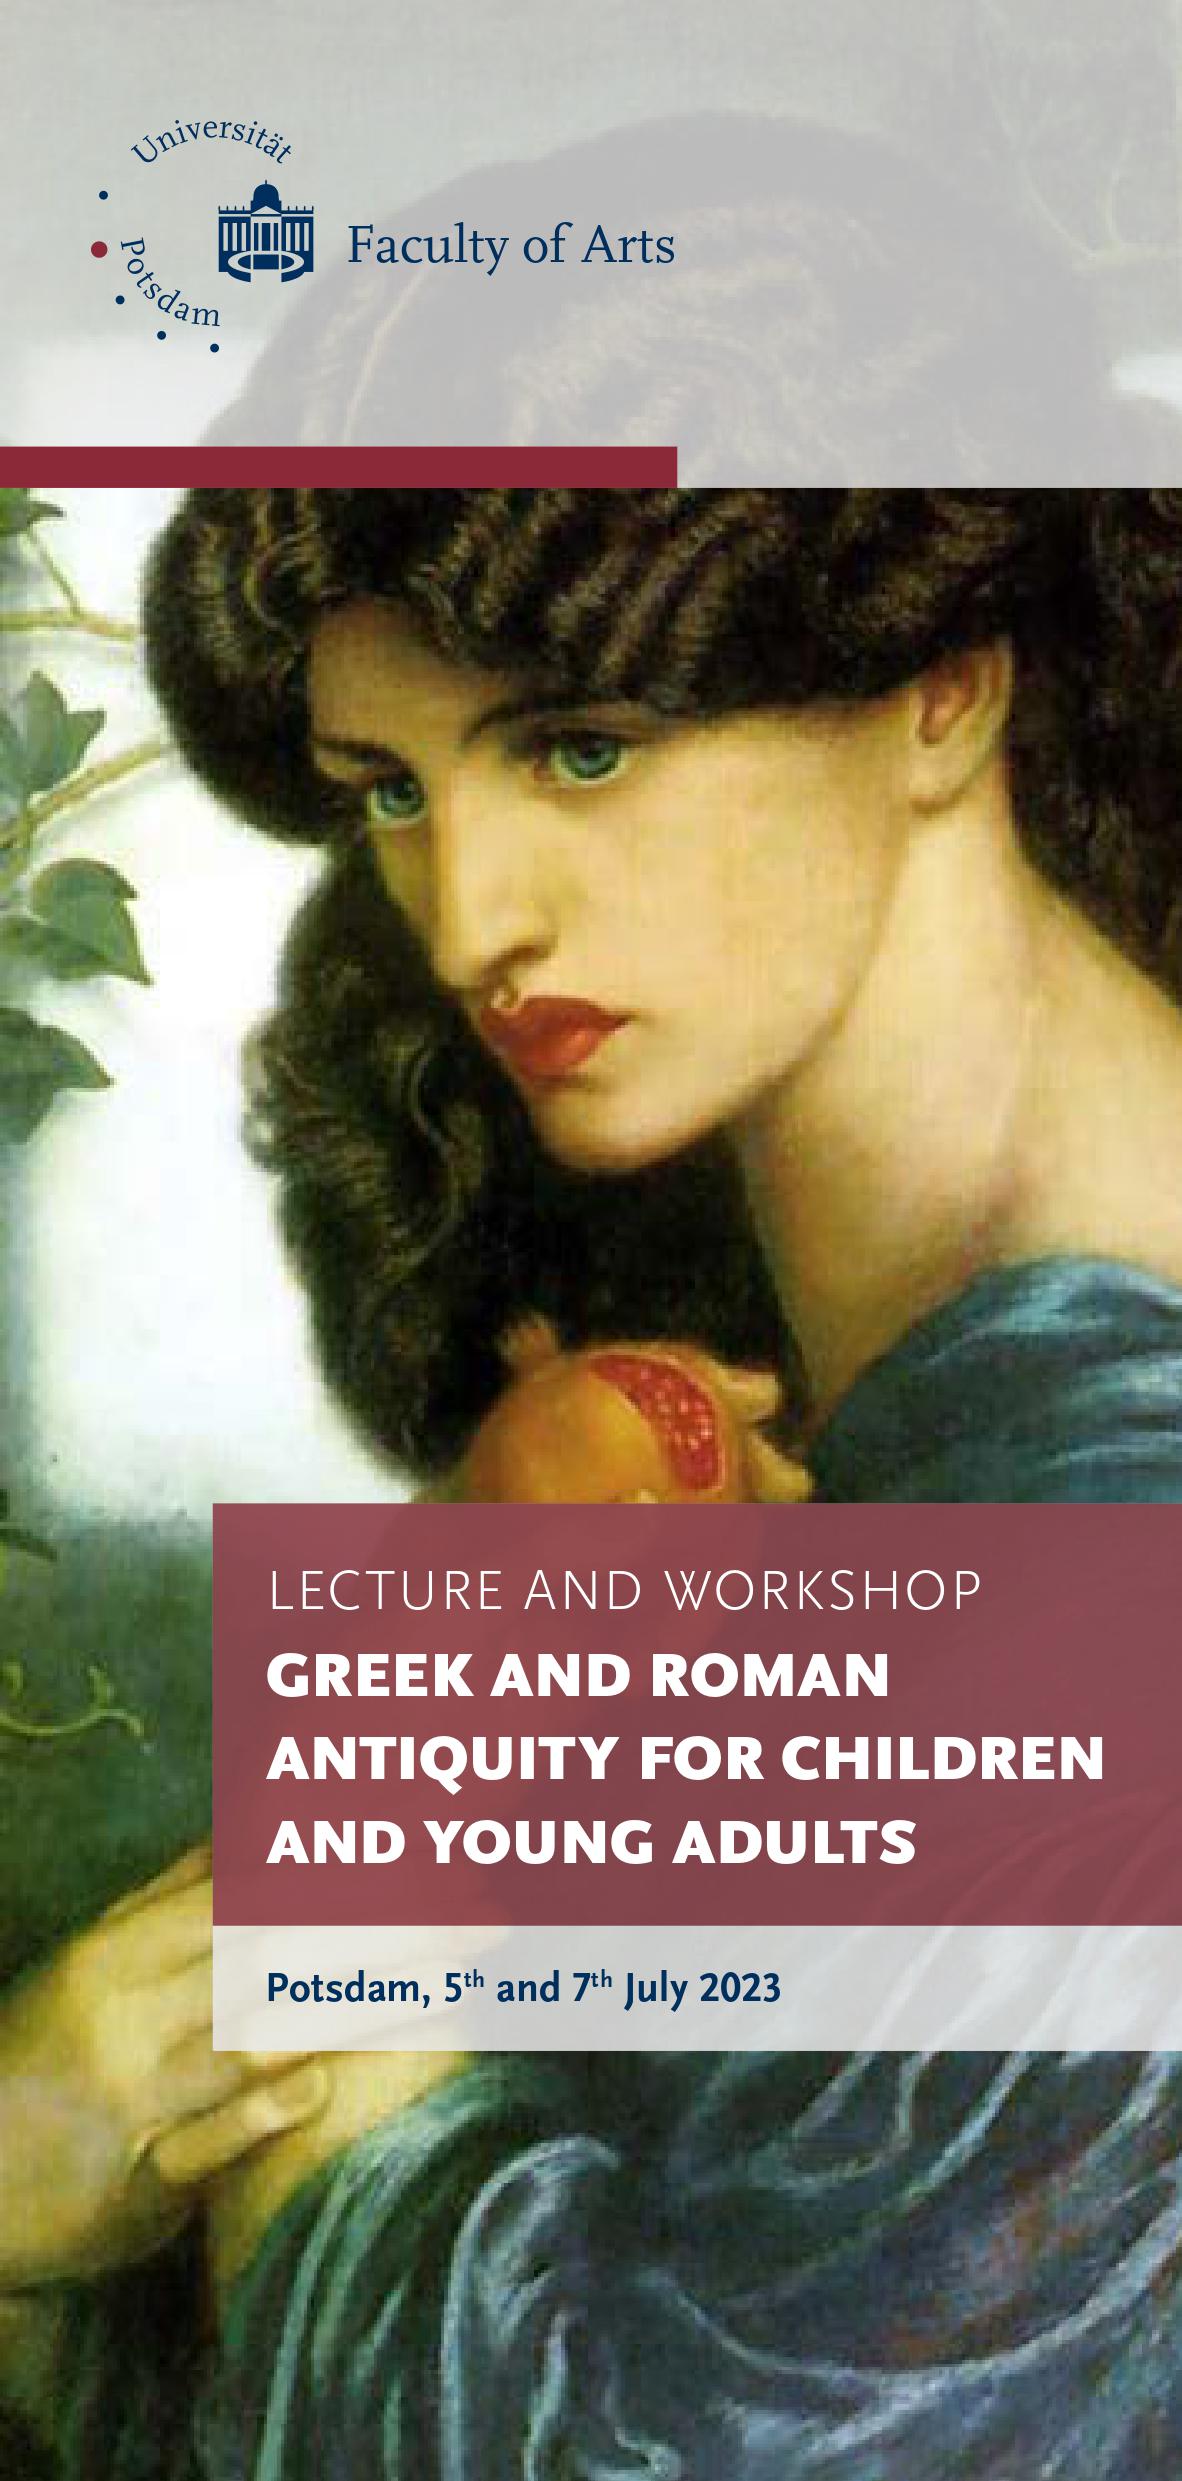 Lecture and Workshop: Greek and Roman Antiquity for Children and Young Adults, Potsdam 5 and 7 July 2023